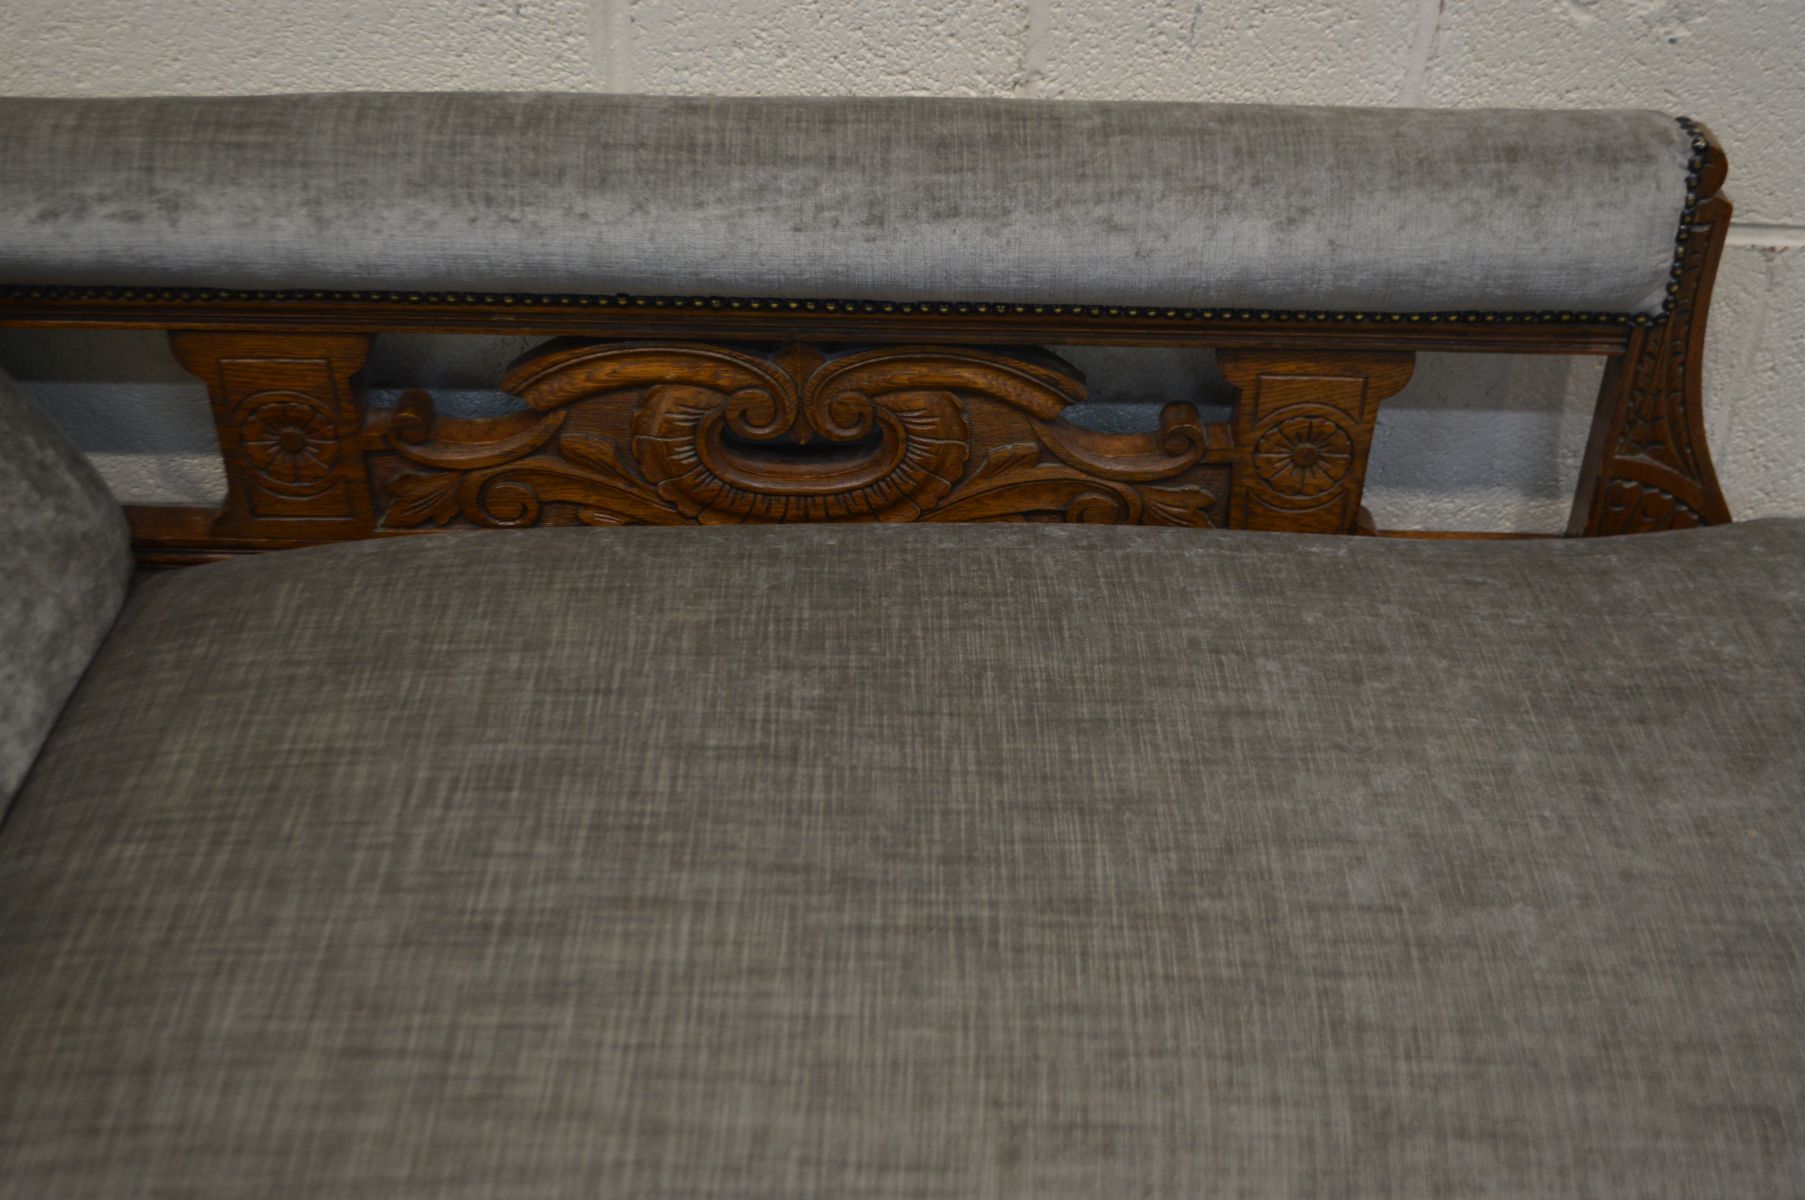 A EDWARDIAN CARVED OAK CHAISE LONGUE, reupholstered in grey, length 177cm - Image 4 of 4